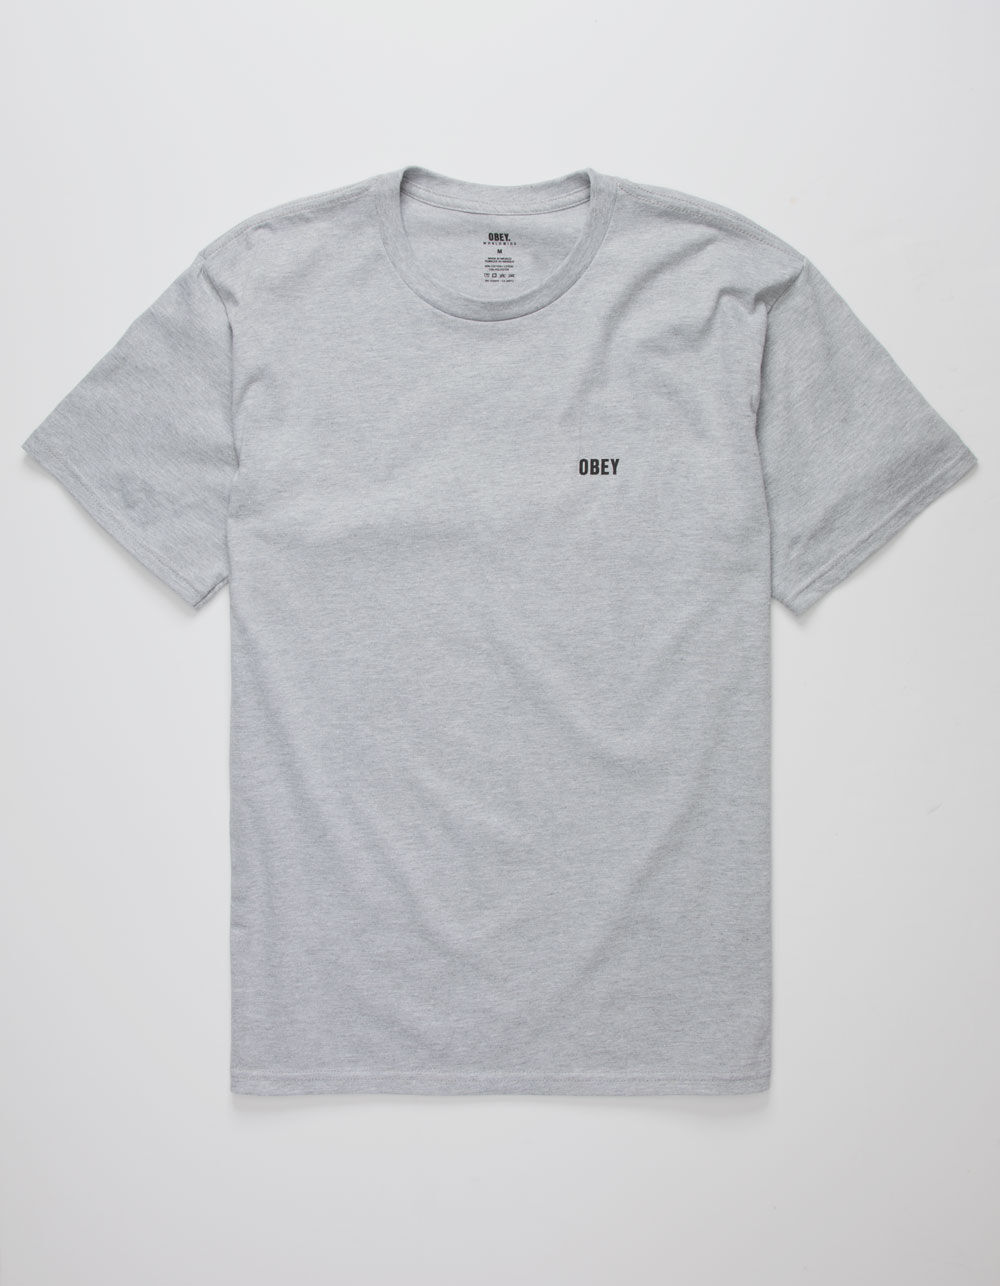 OBEY Equality Mens Heather Gray T-Shirt - HEATHER GRAY | Tillys